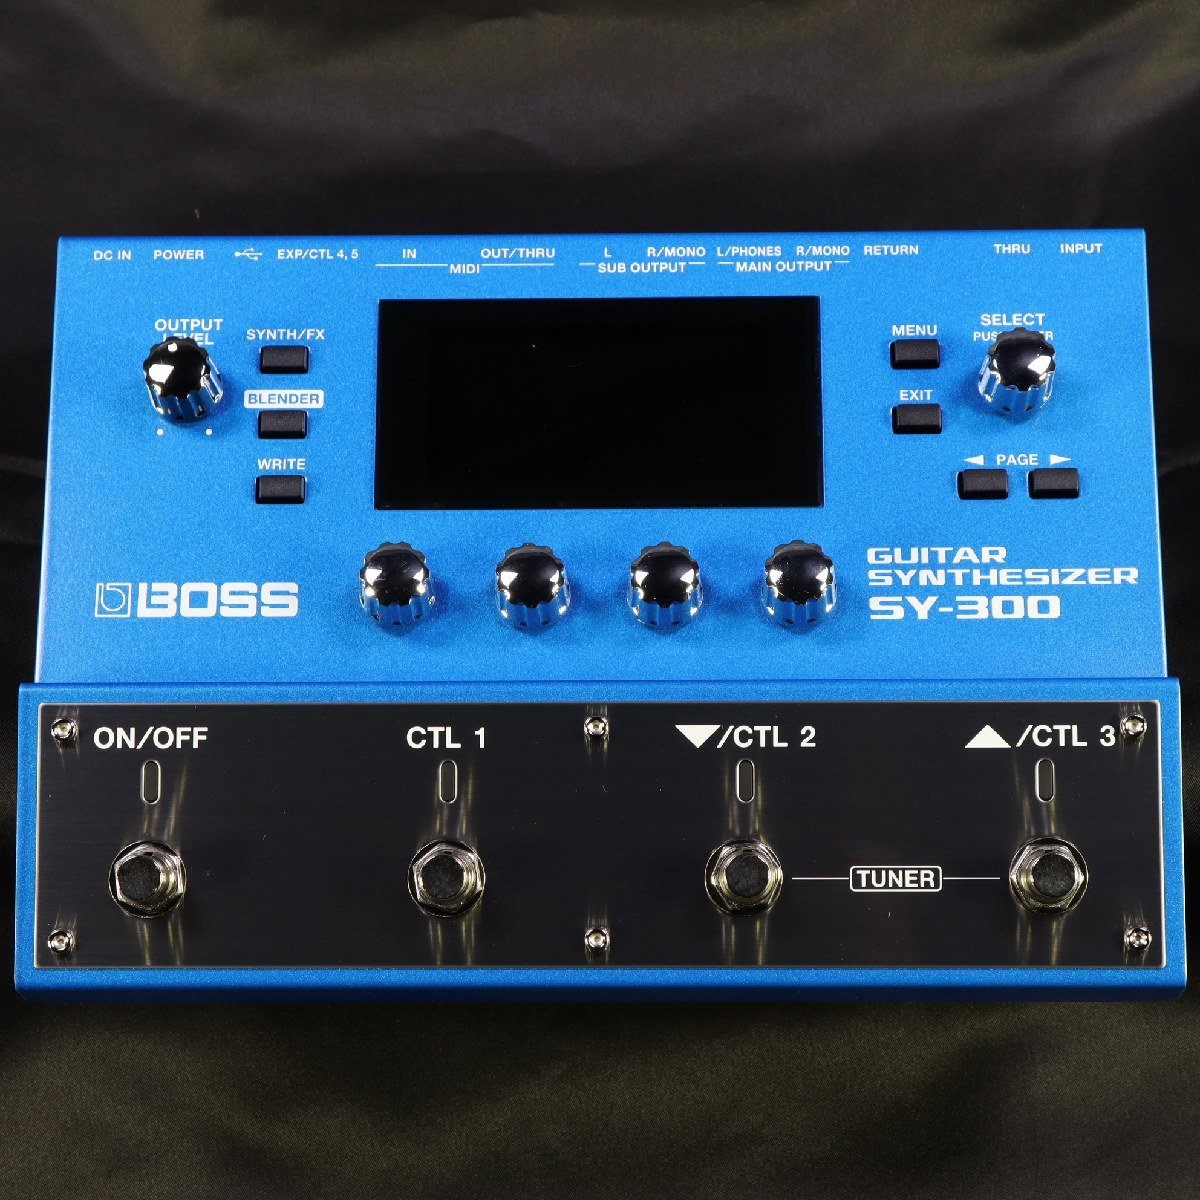 BOSS SY-300 Guitar Synthesizer SY300 ギターシンセサイザー ボス ...